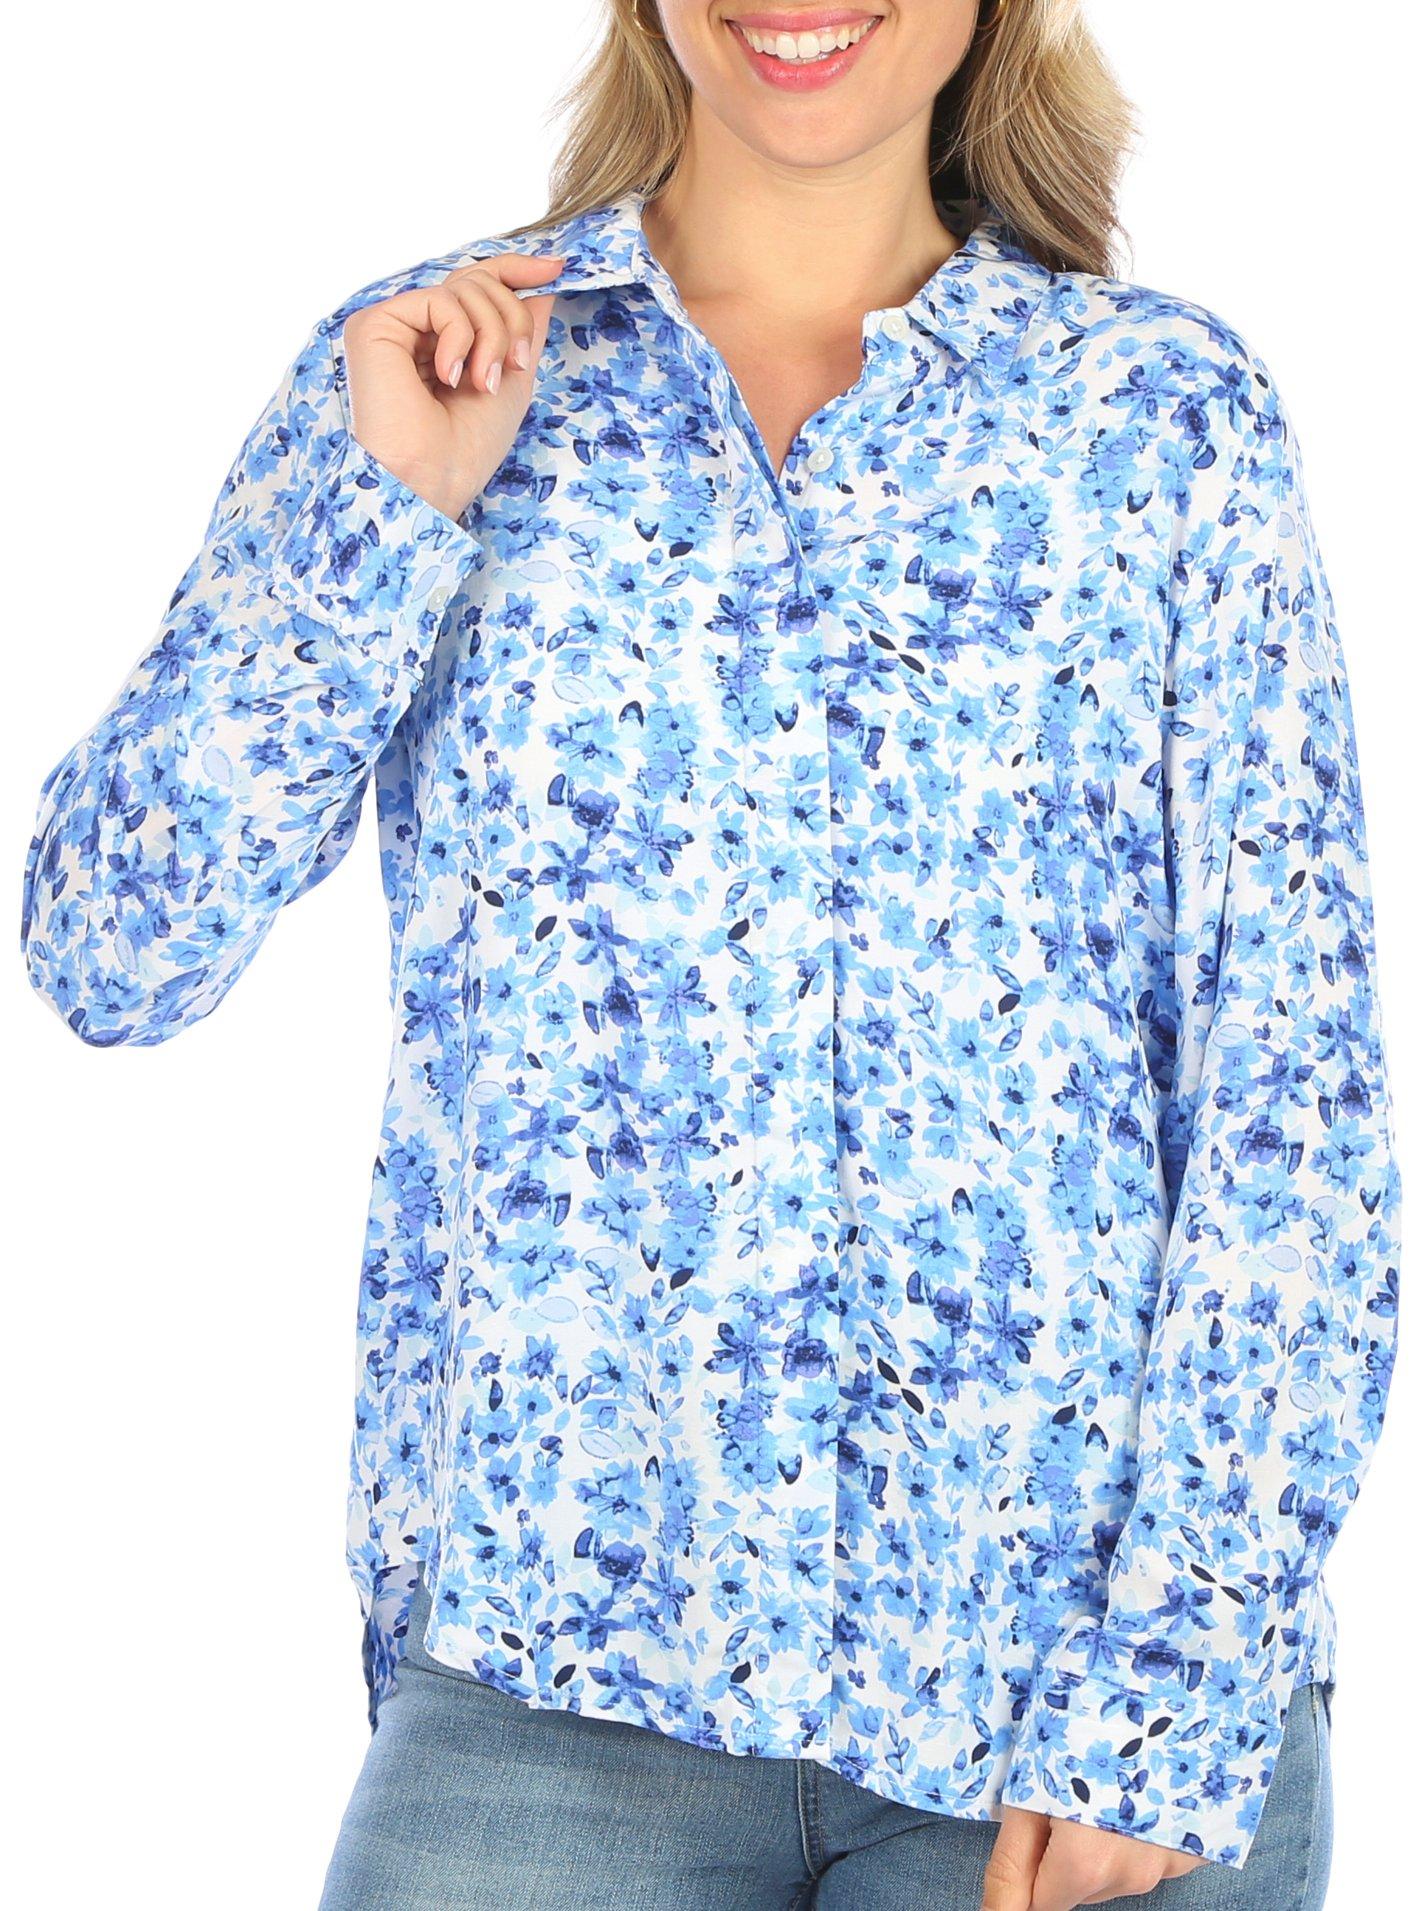 Womens Long Sleeve Floral Print Button Down Top